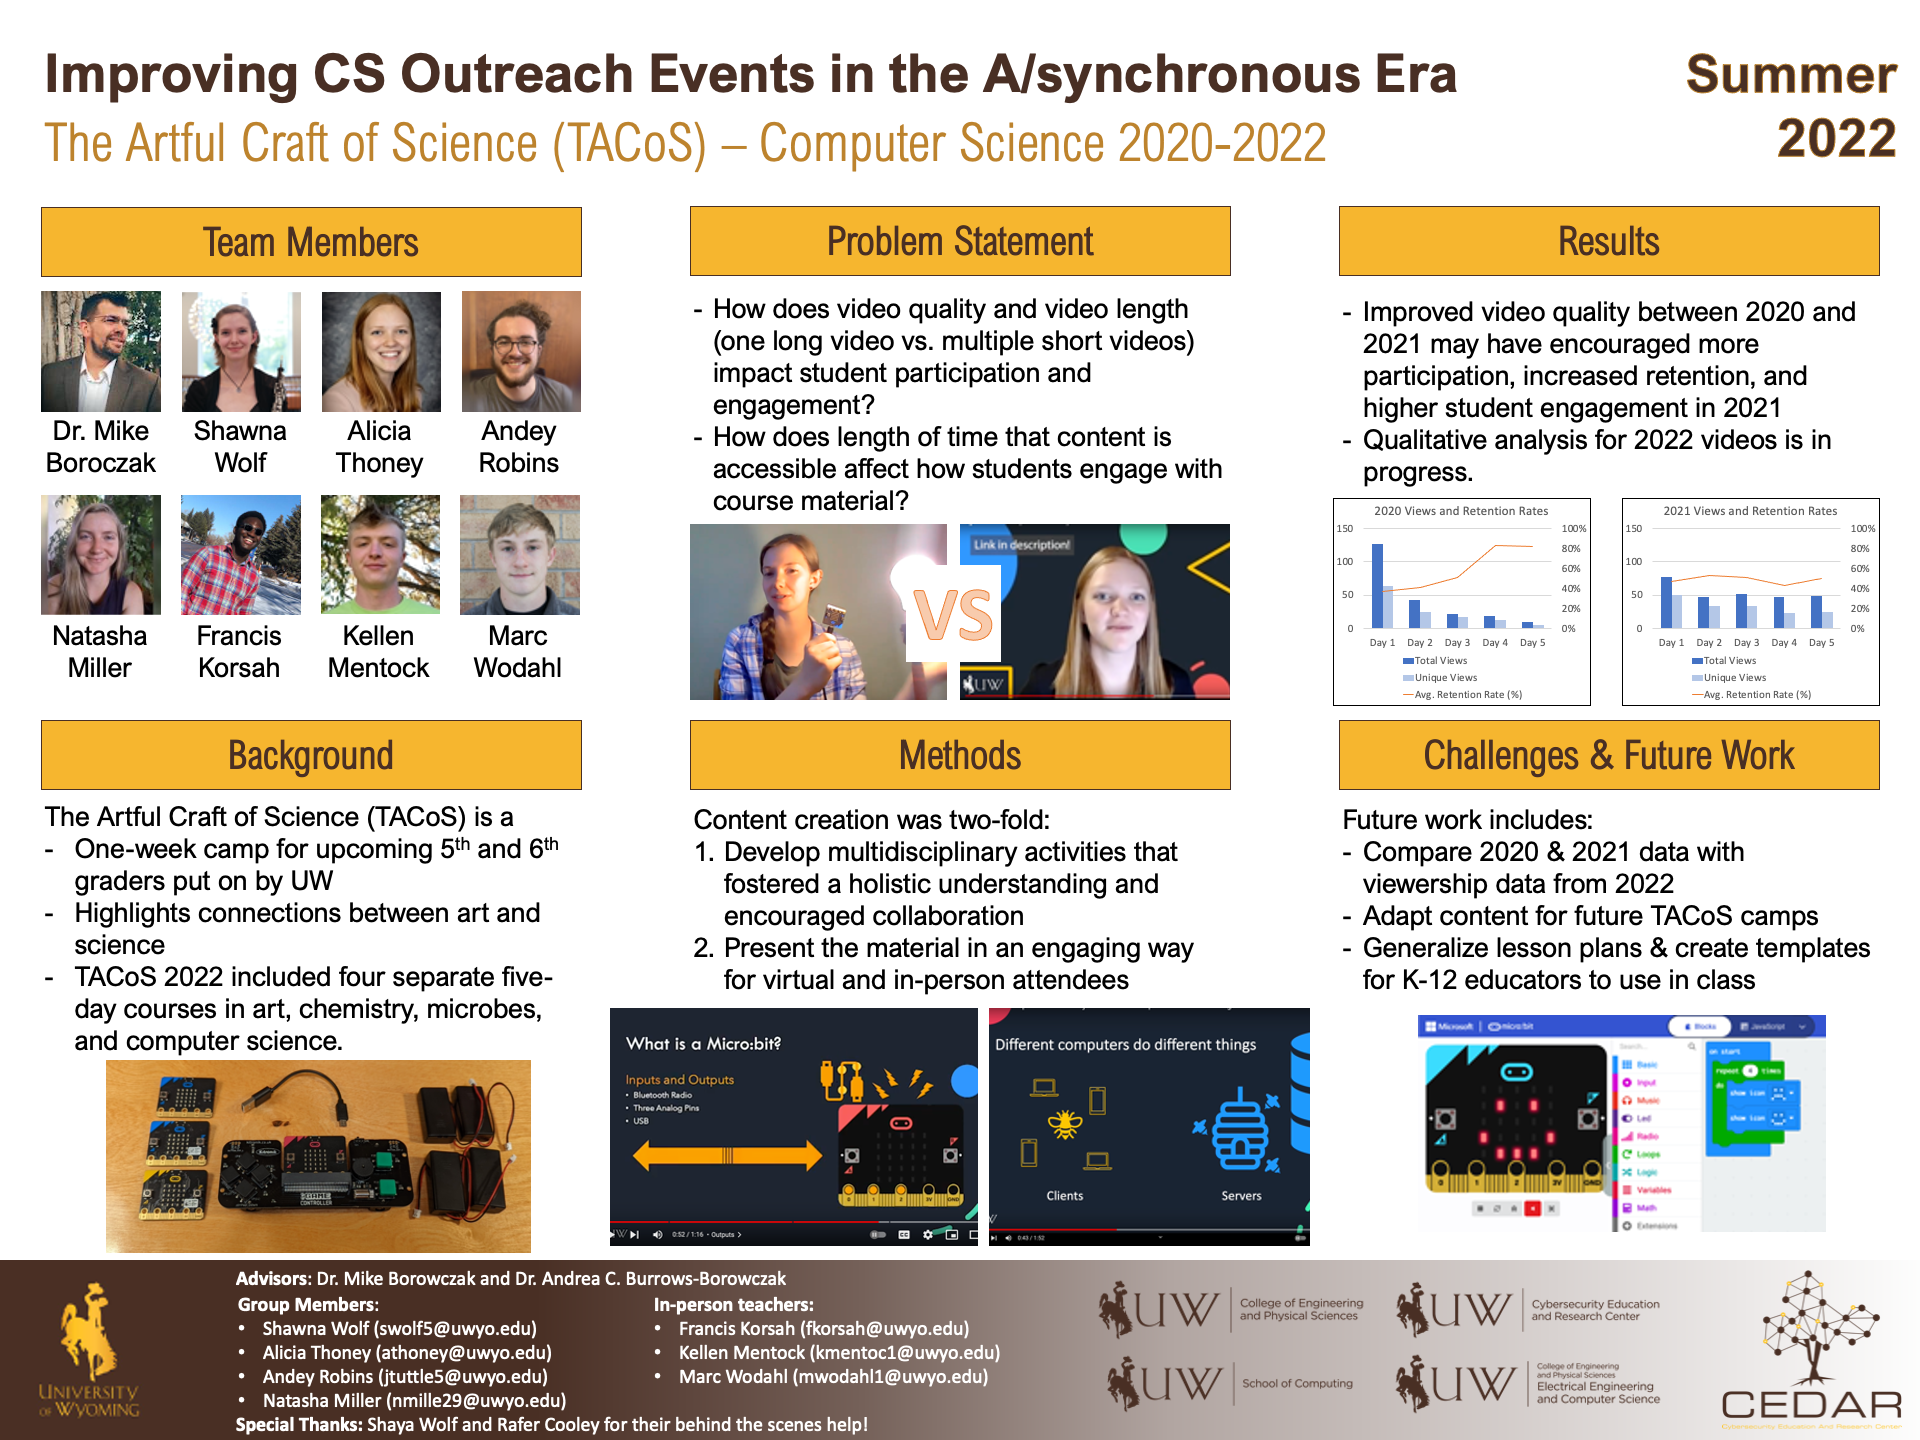  Poster for Improving CS Outreach Events in the A/synchronous Era